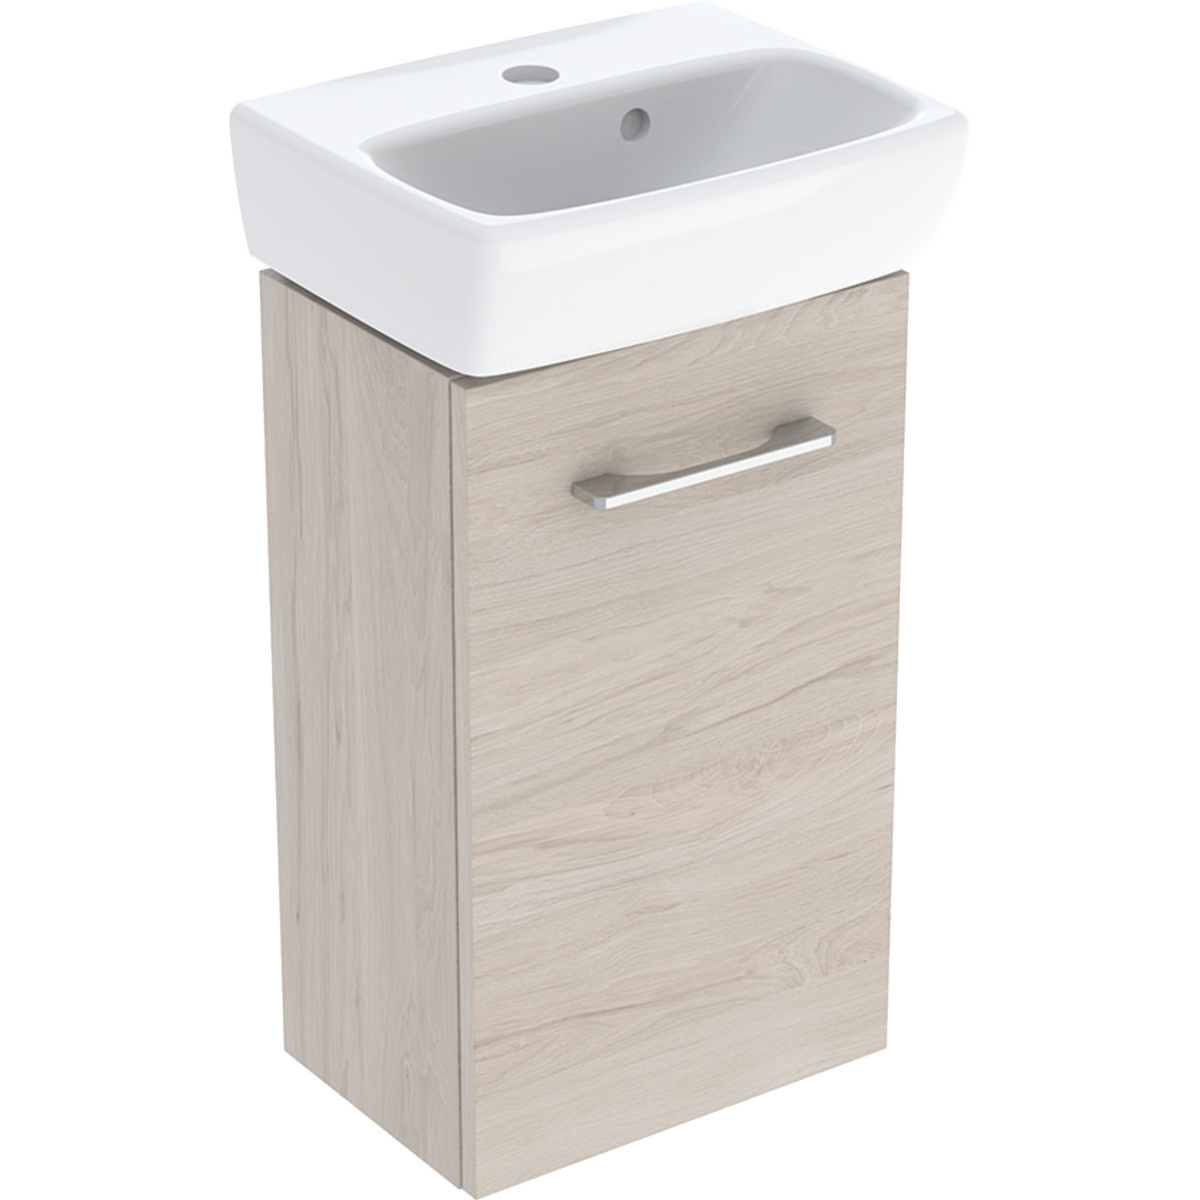 Selnova Square basins with cabinet, one door 360mm - Light Hickory 